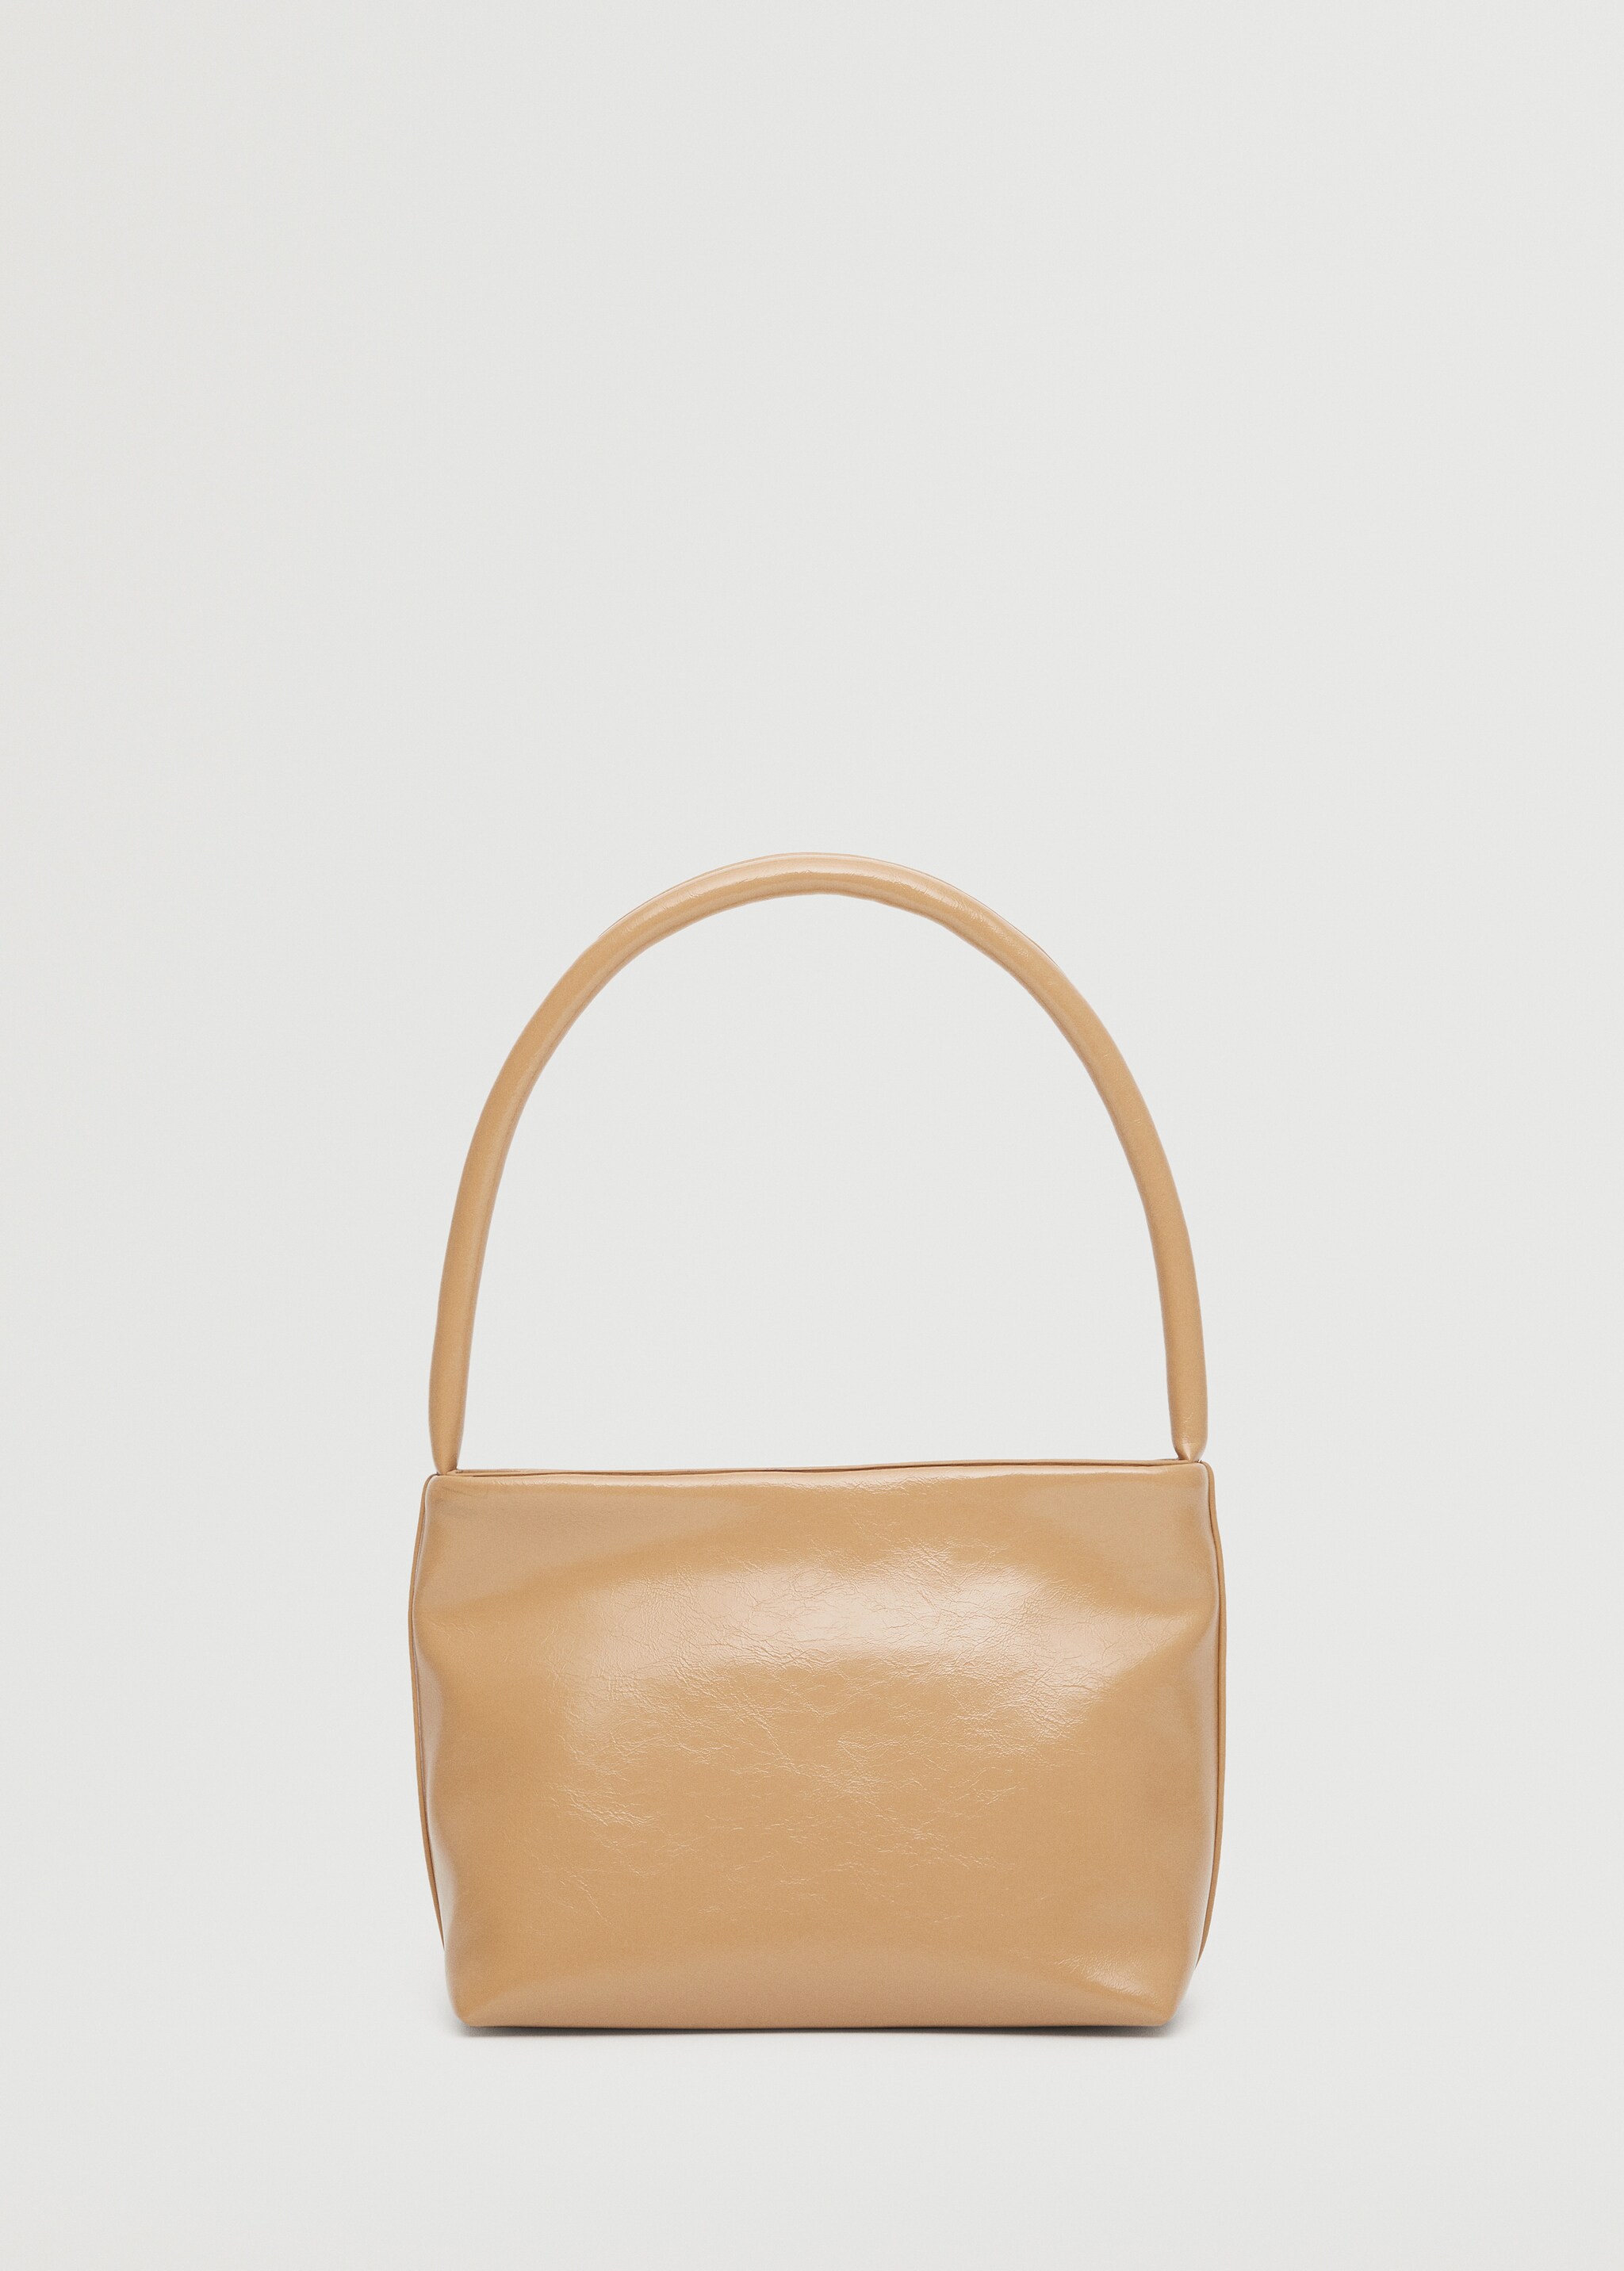 Patent leather shoulder bag - Article without model